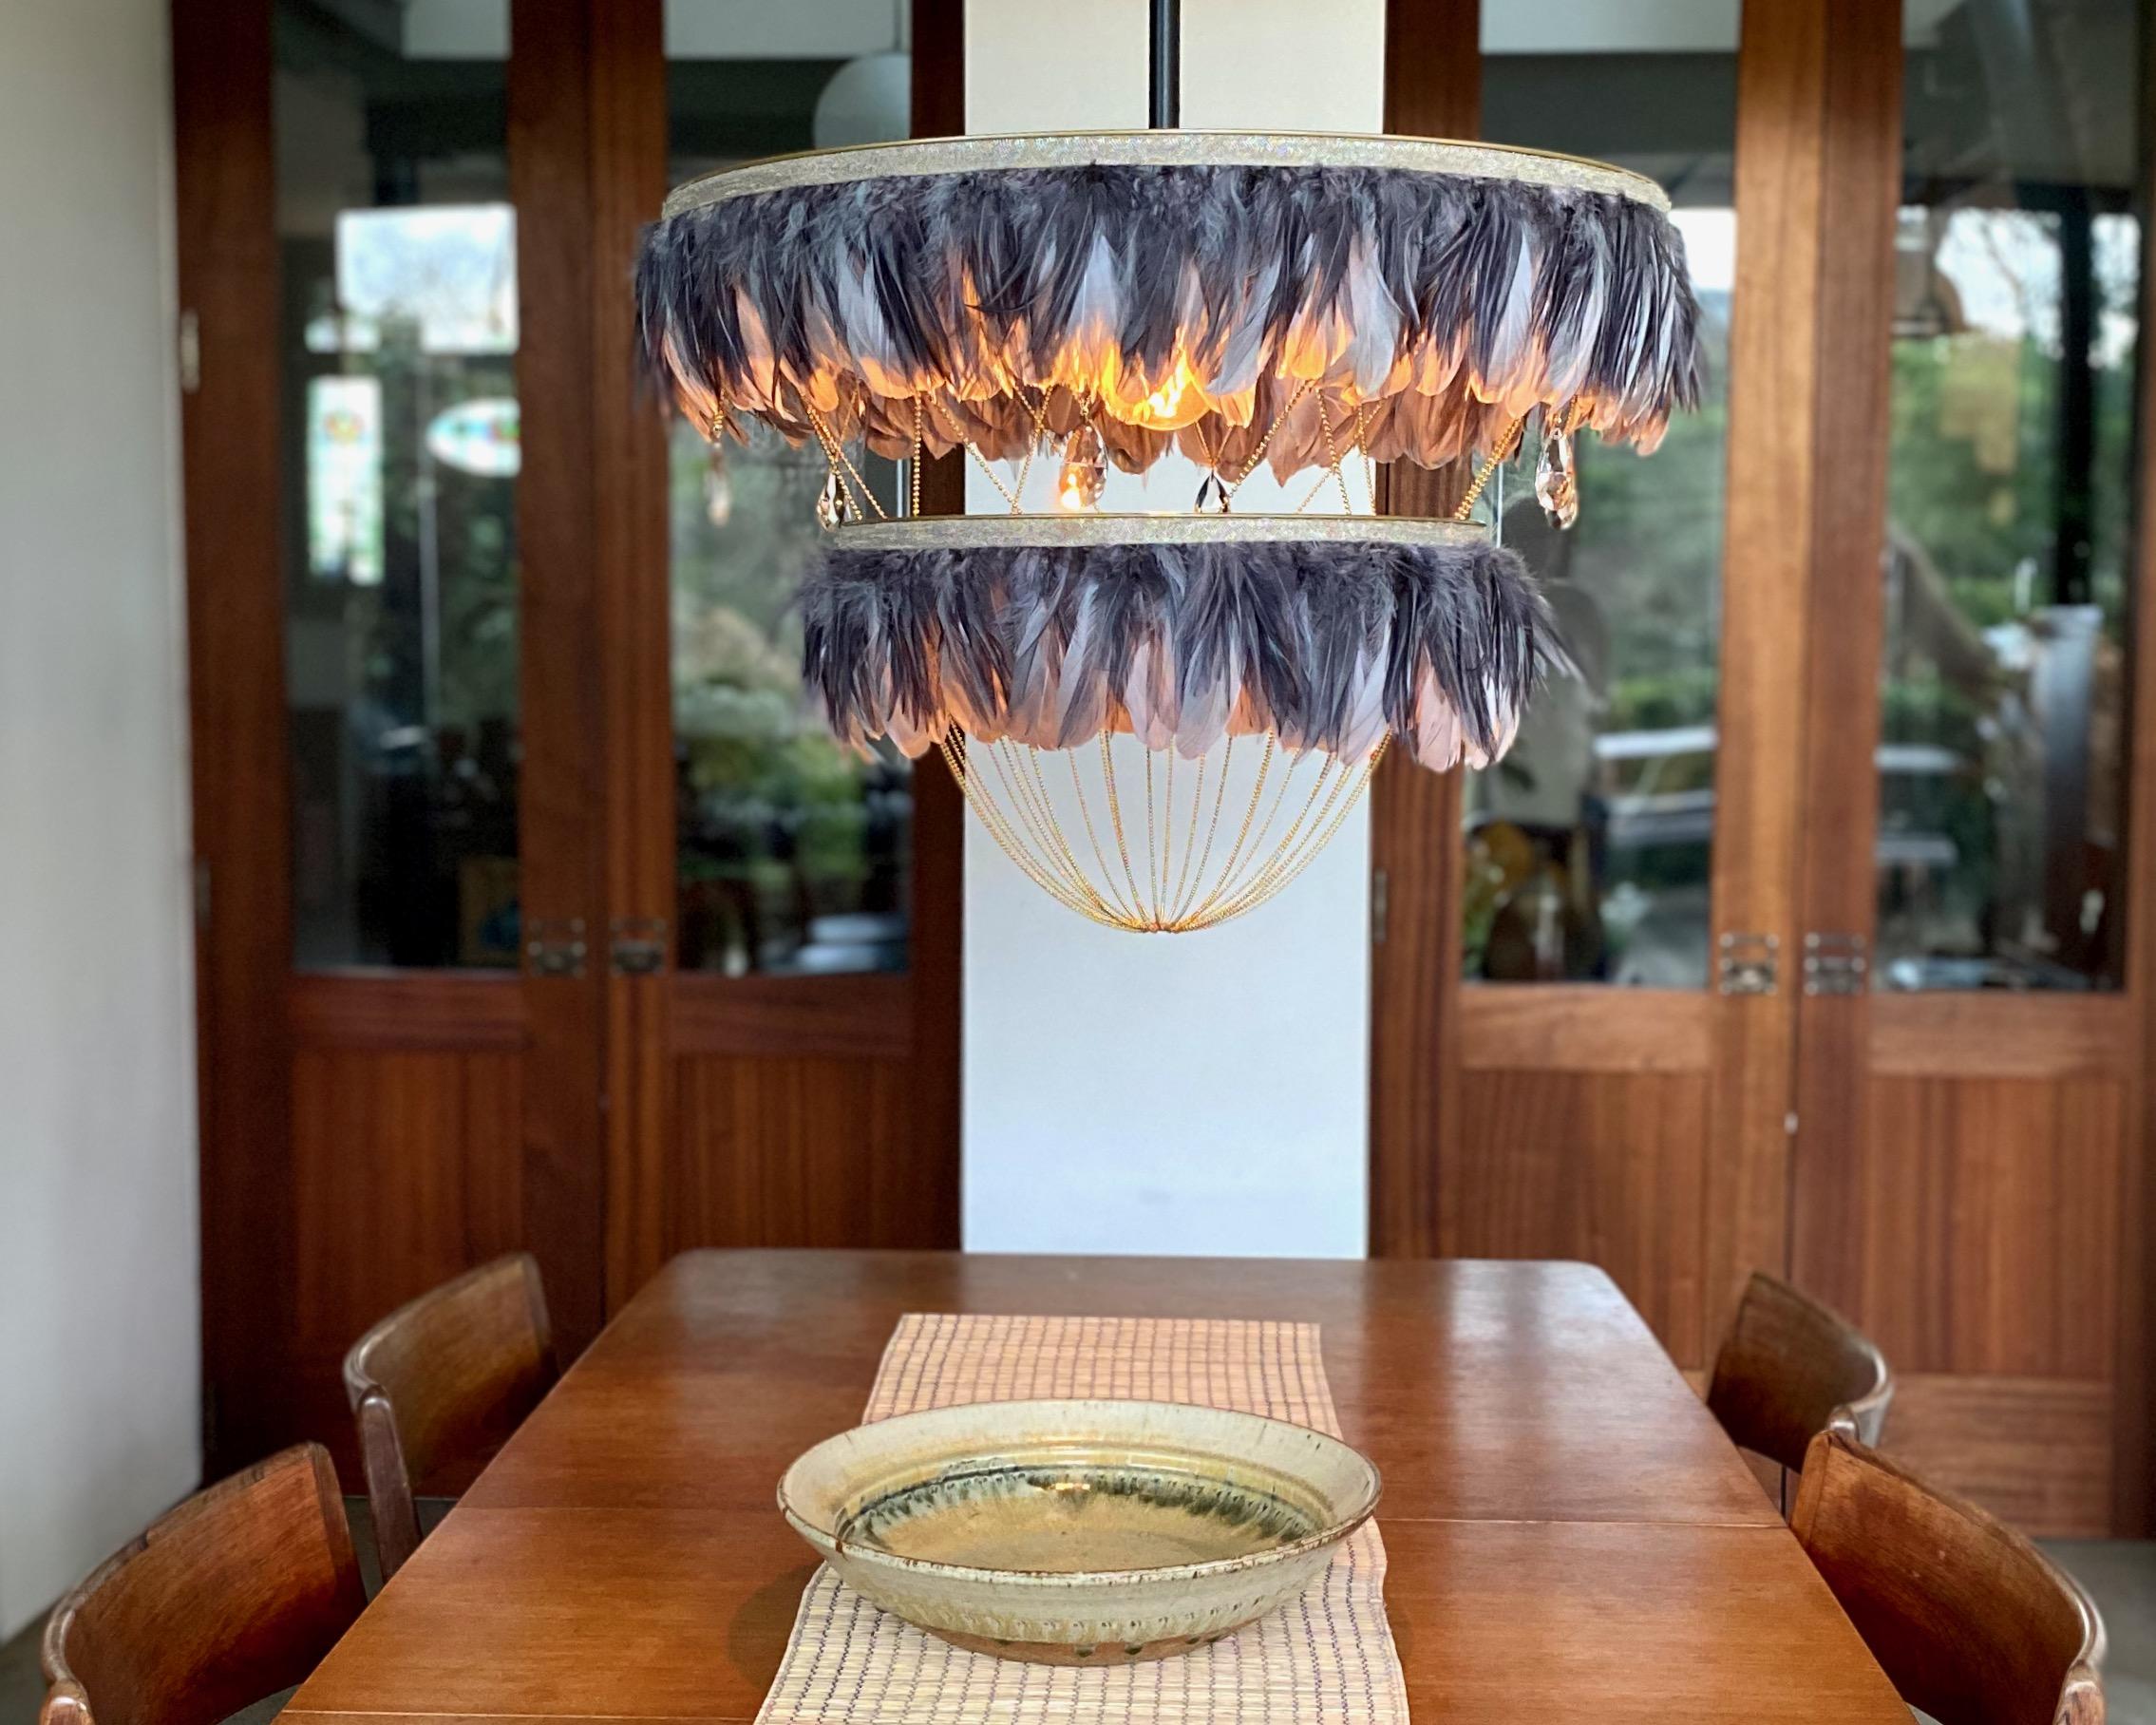 British Feather Chandelier in Two Tone Grey - Bertie -  Hand Made to order in London.  For Sale